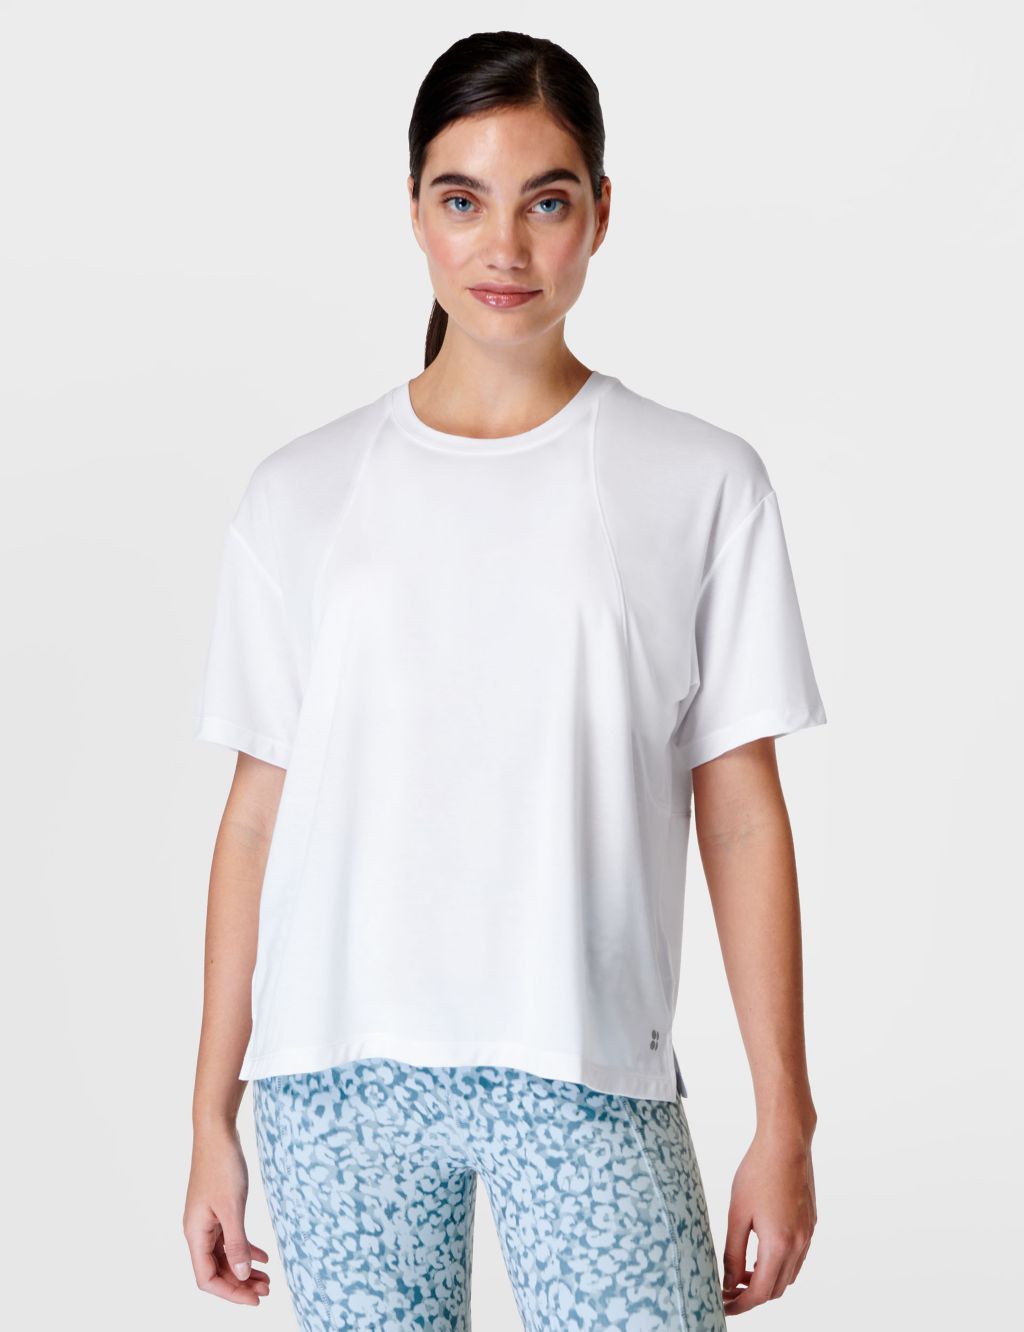 Women’s Relaxed-Fit Sports Tops & T-Shirts | M&S